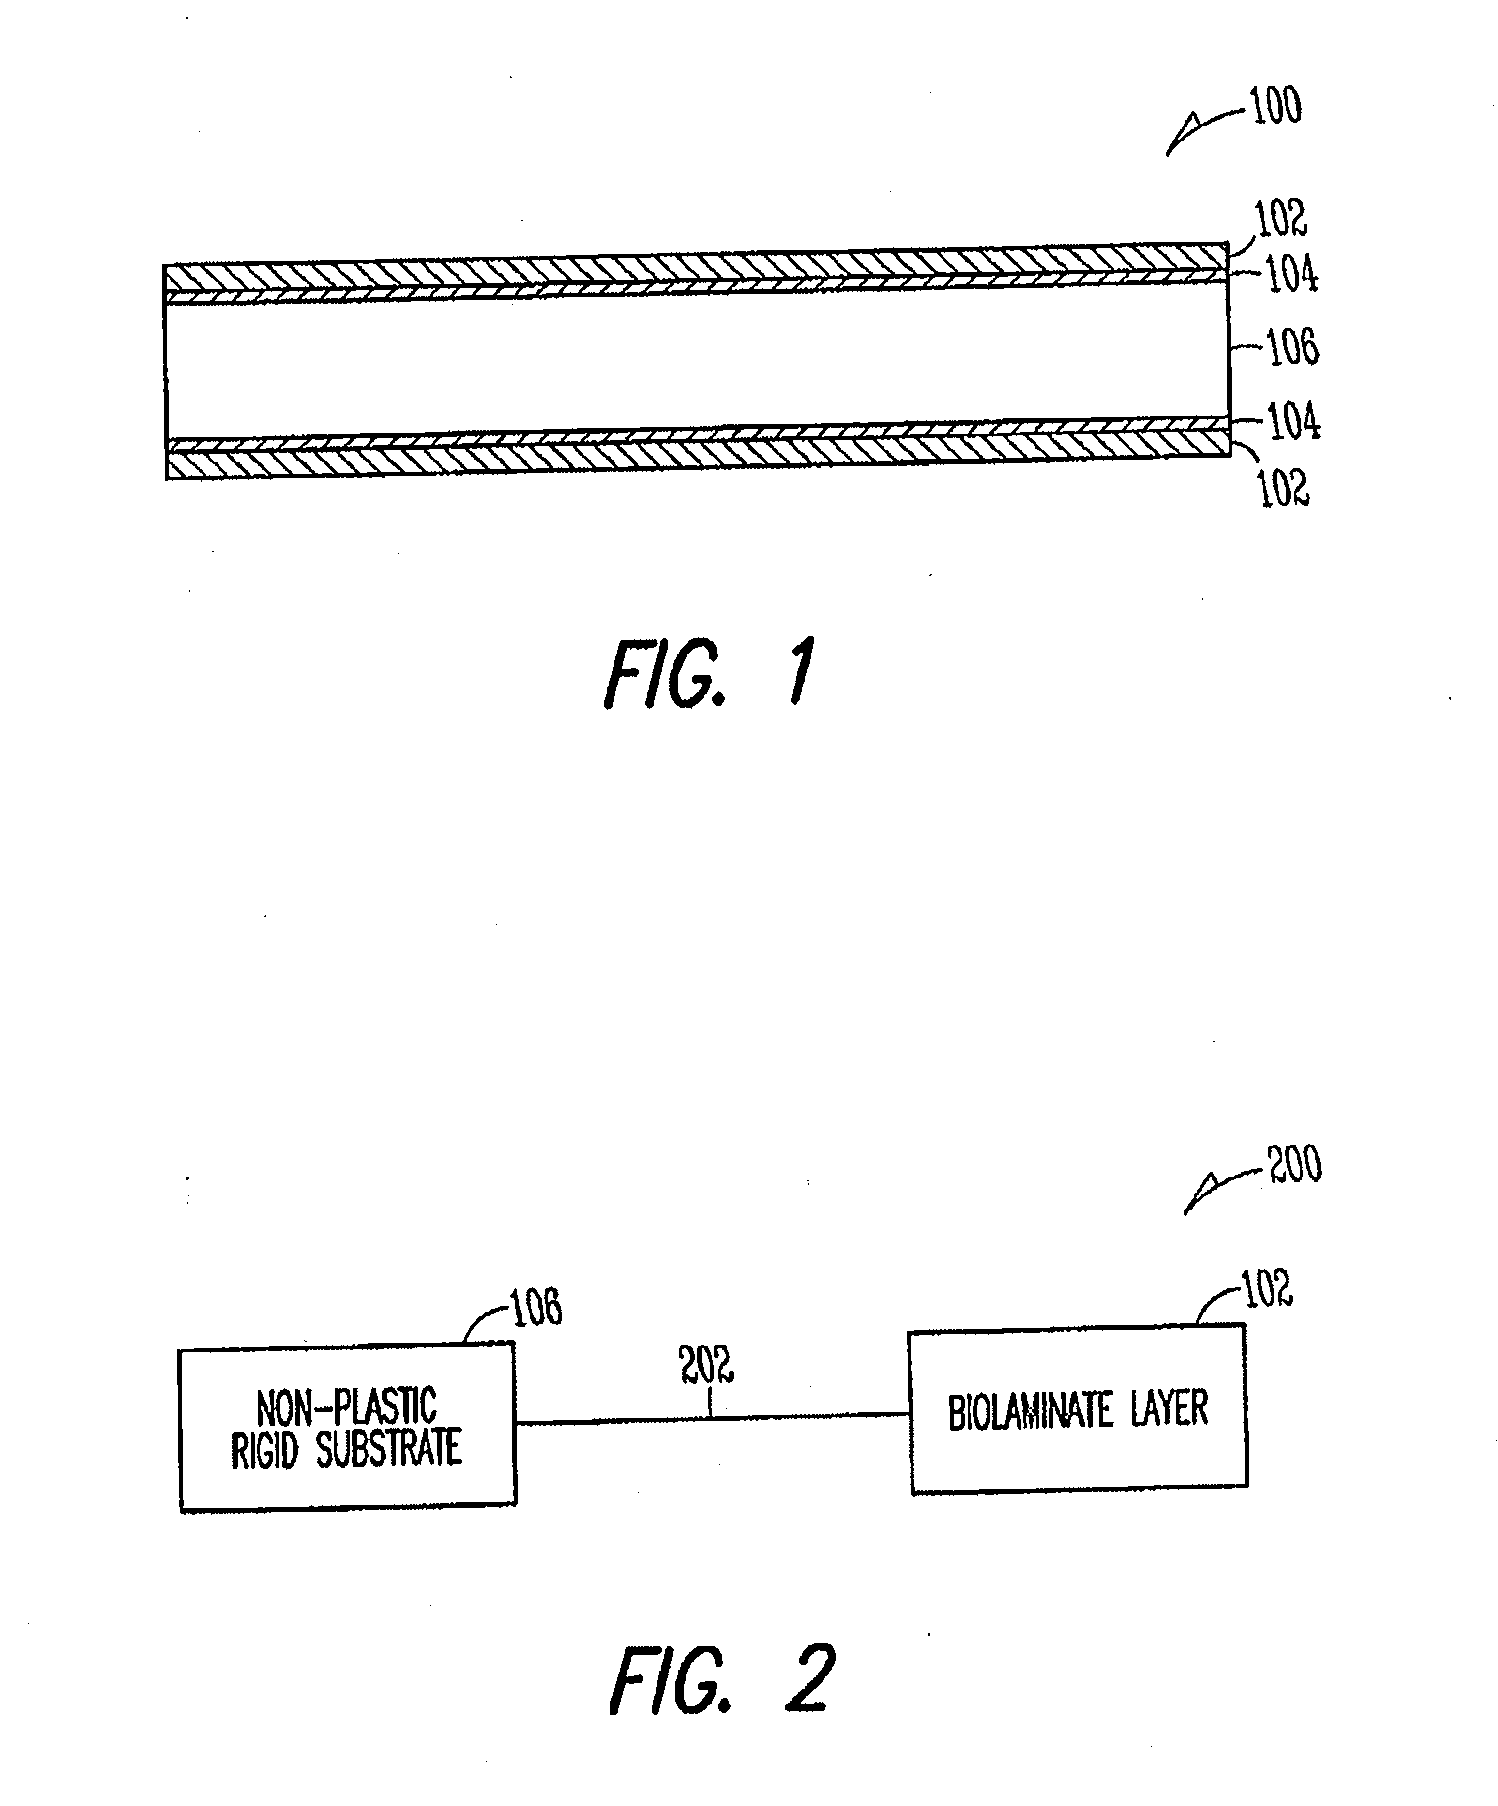 Cellulosic biolaminate composite assembly and related methods